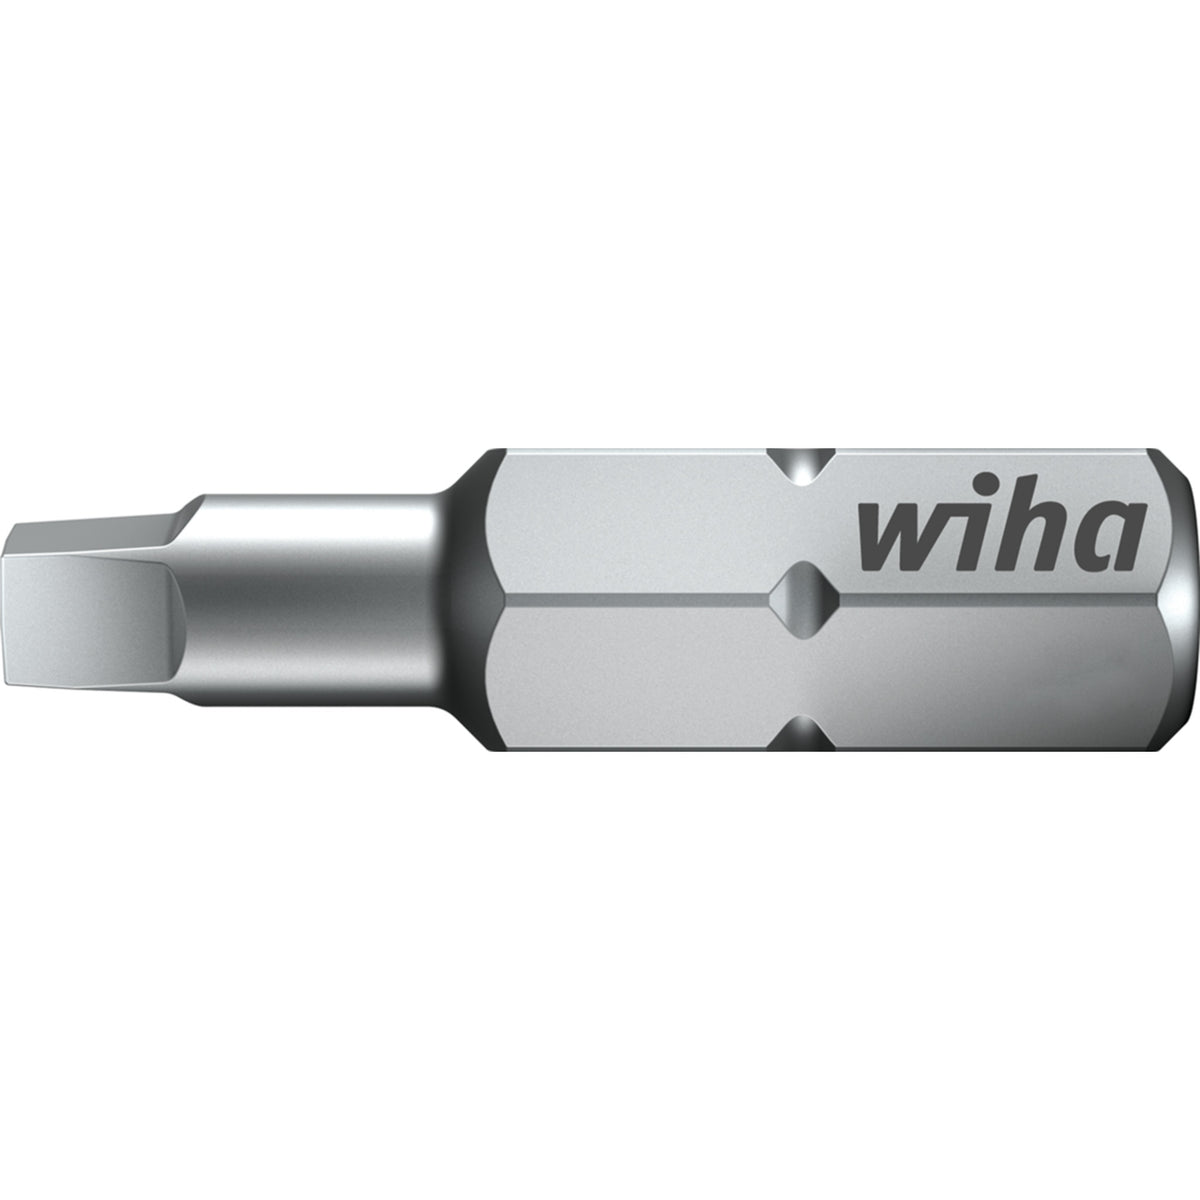 Wiha 72344 Square Contractor Bits #1 x 25mm - 250 Pack